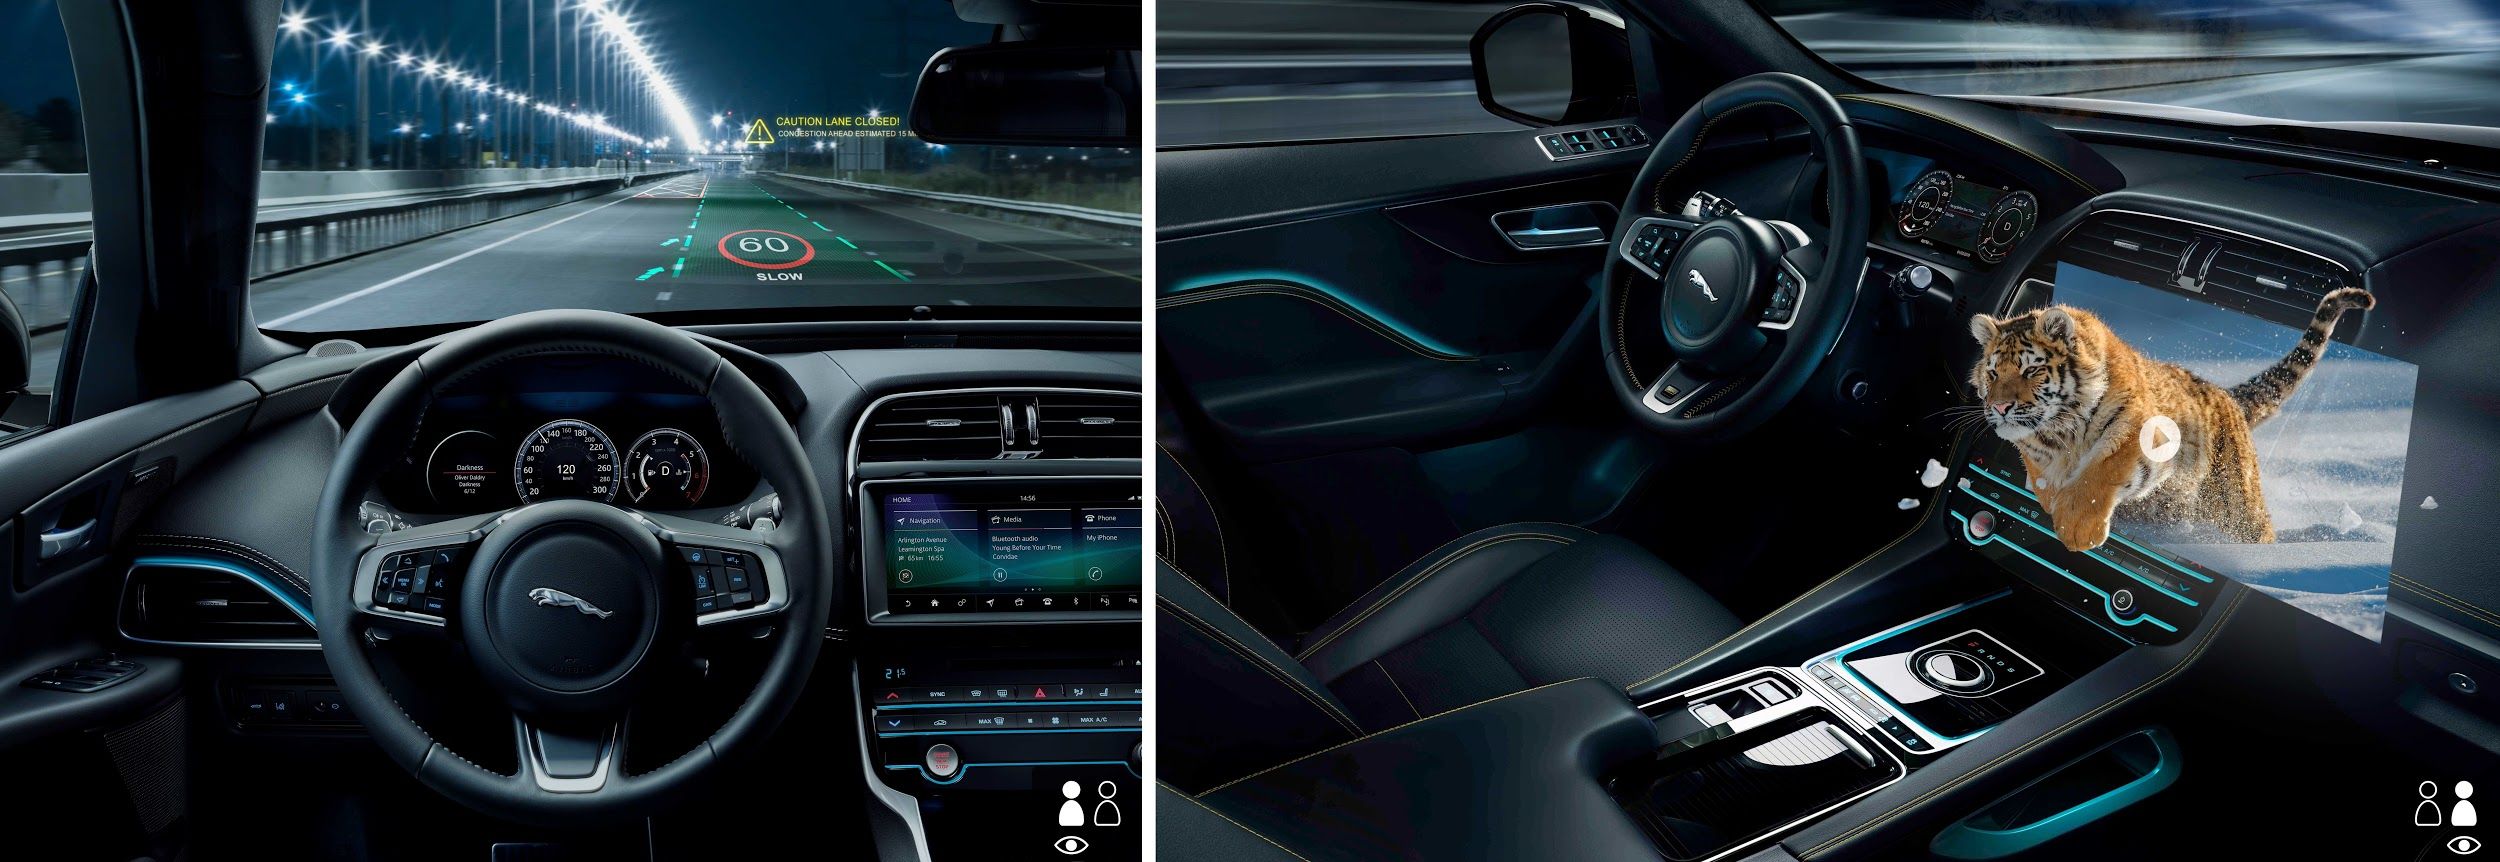  Want a 3D IN-CAR EXPERIENCE WITH HEAD-UP DISPLAY RESEARCH? JAGUAR LAND ROVER is all set to push the boundaries

